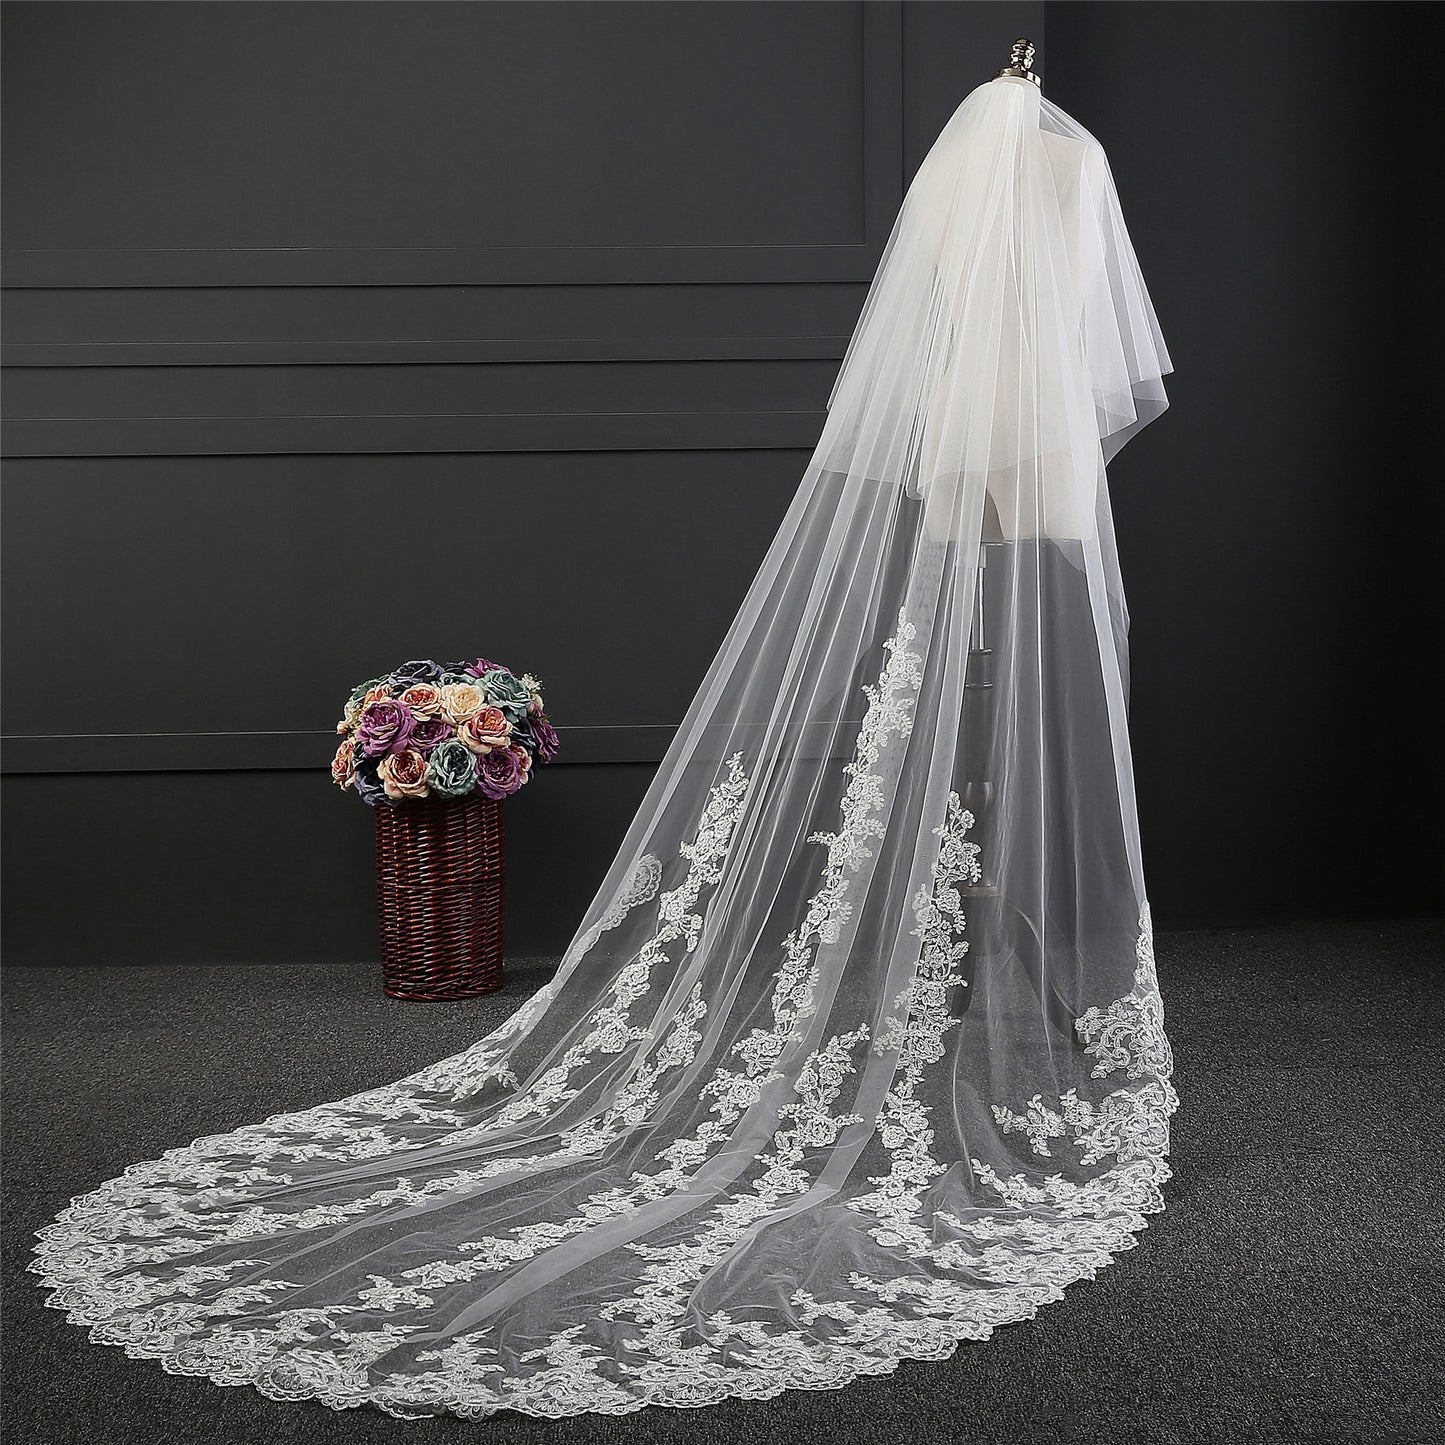 Nikki - two layer cathedral length veil with a simple edge finish